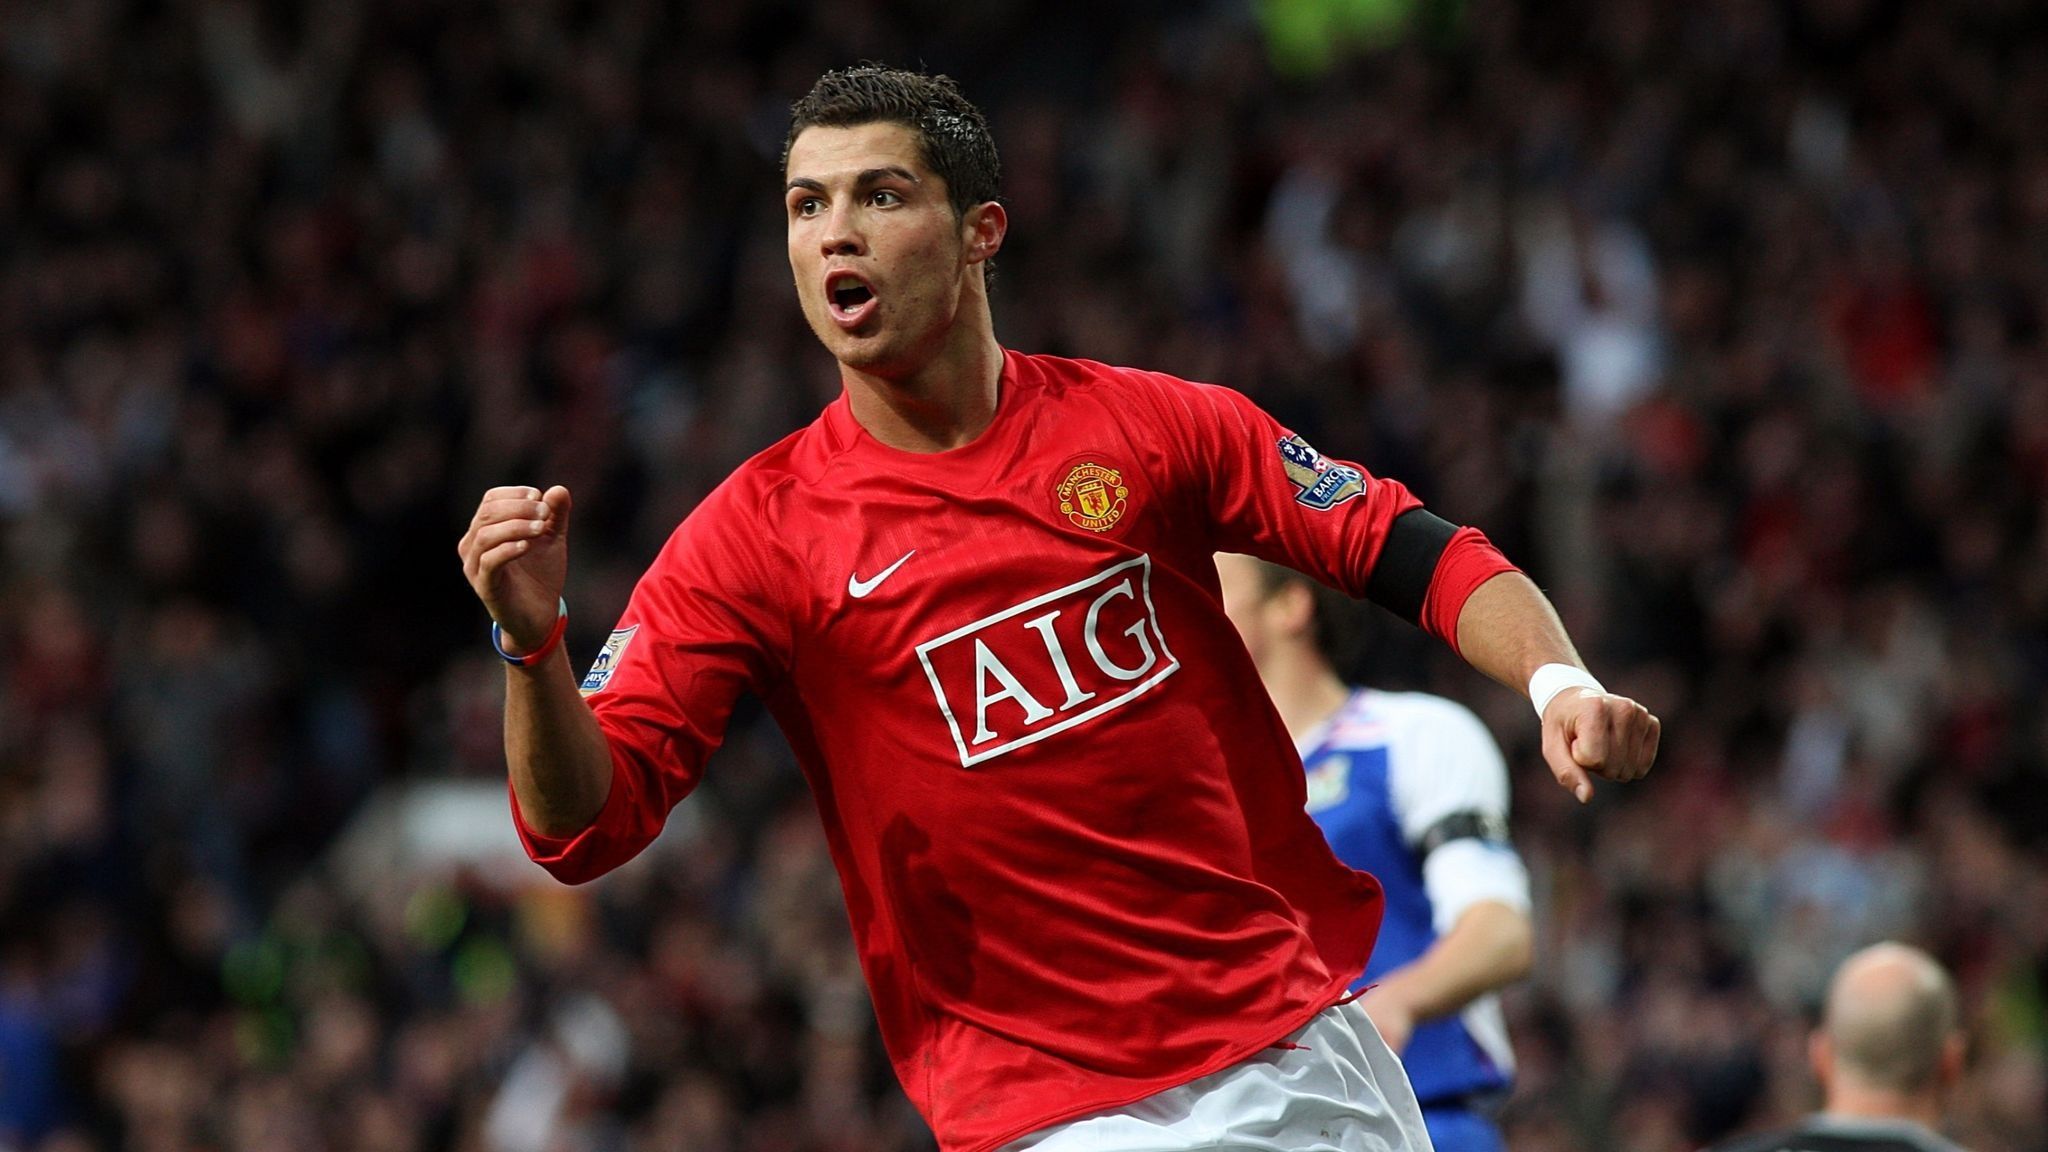 New Man Utd Owner Hails Ronaldo As The Best Player In Club's History